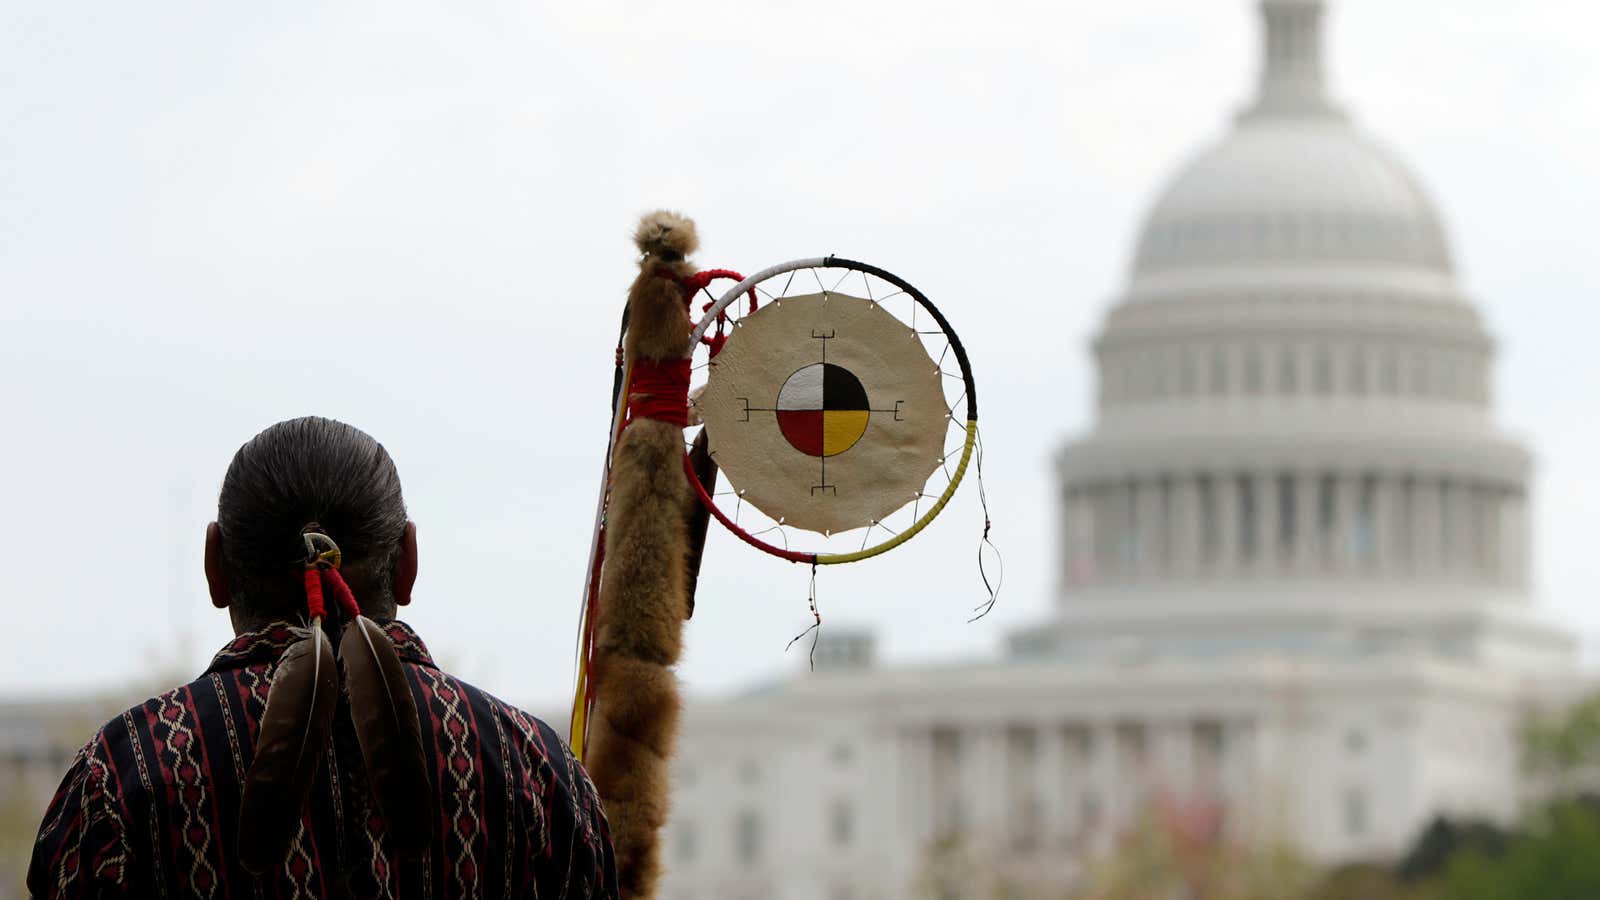 Matthew Black Eagle Man of the Sioux Long Plains First Nation of Manitoba protests in front of the U.S. Capitol, against the Keystone XL pipeline in April 2014. (Reuters/Gary Cameron)